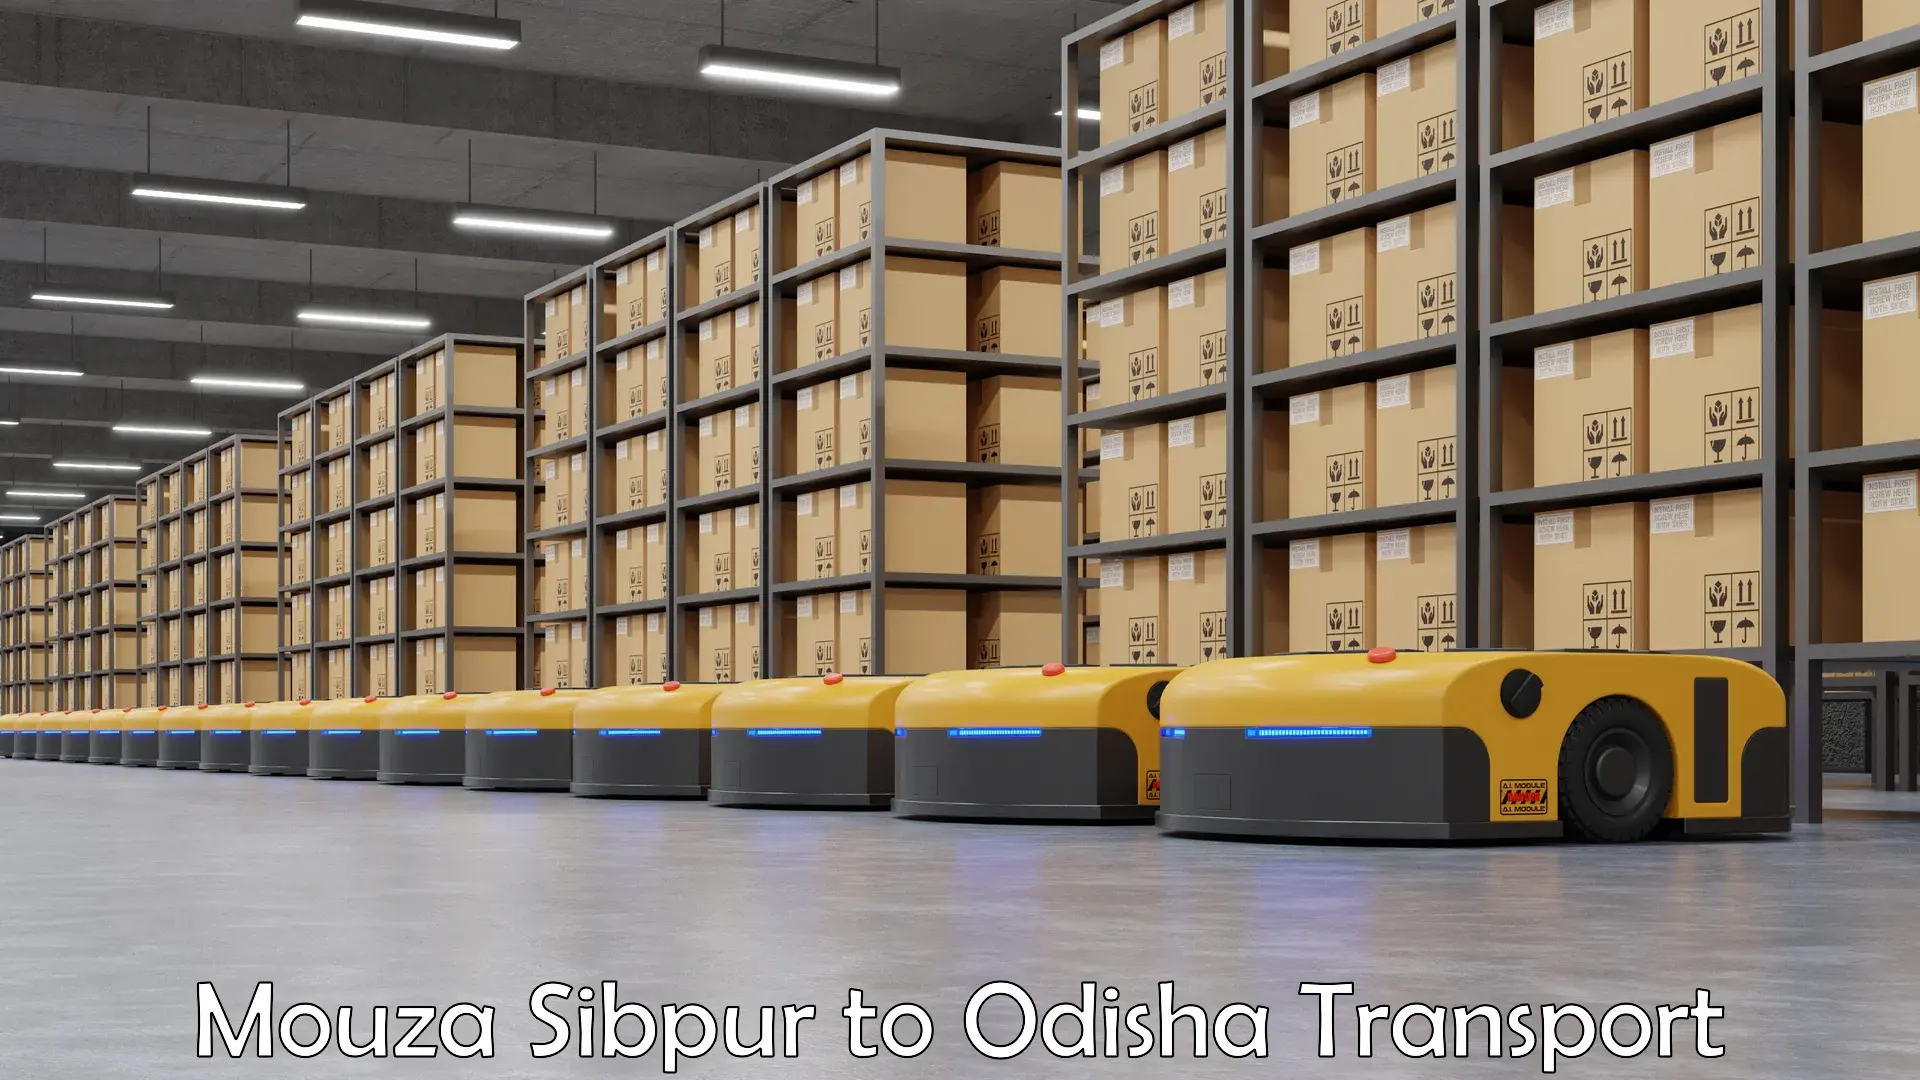 Truck transport companies in India Mouza Sibpur to Riamal